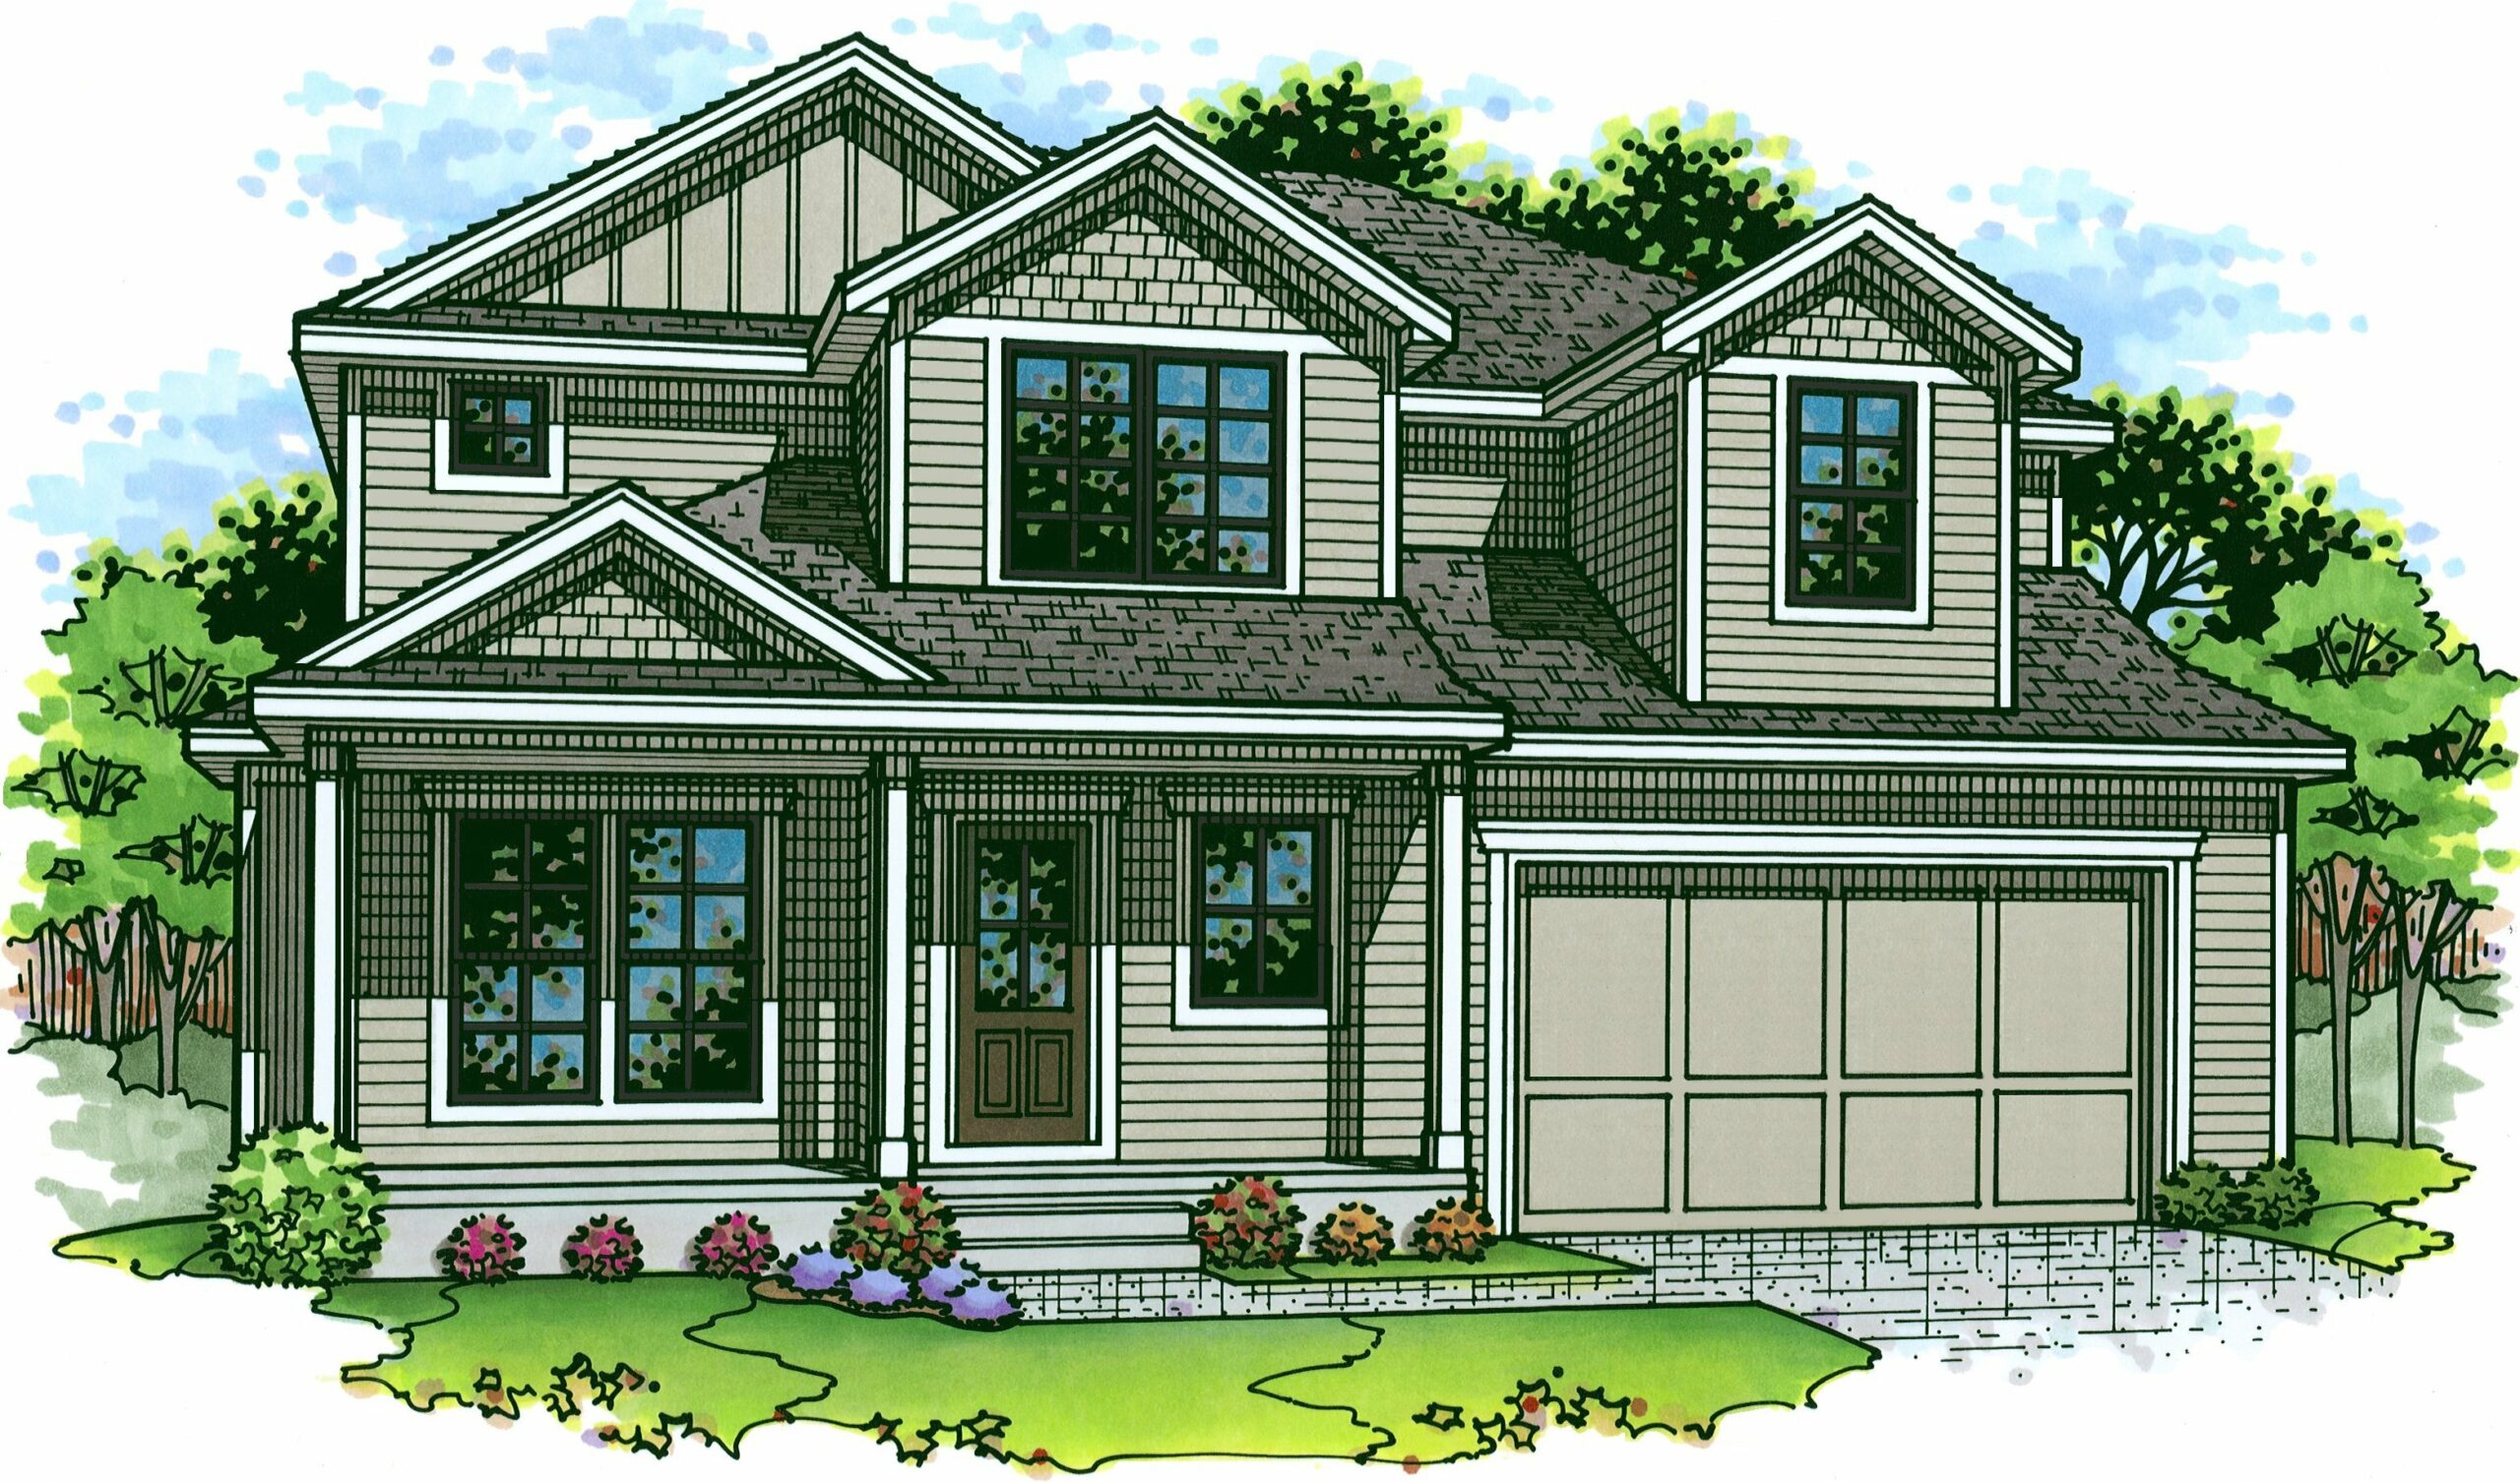 Rendering of the front elevation of the Sequoia Expanded model from Lambie Homes